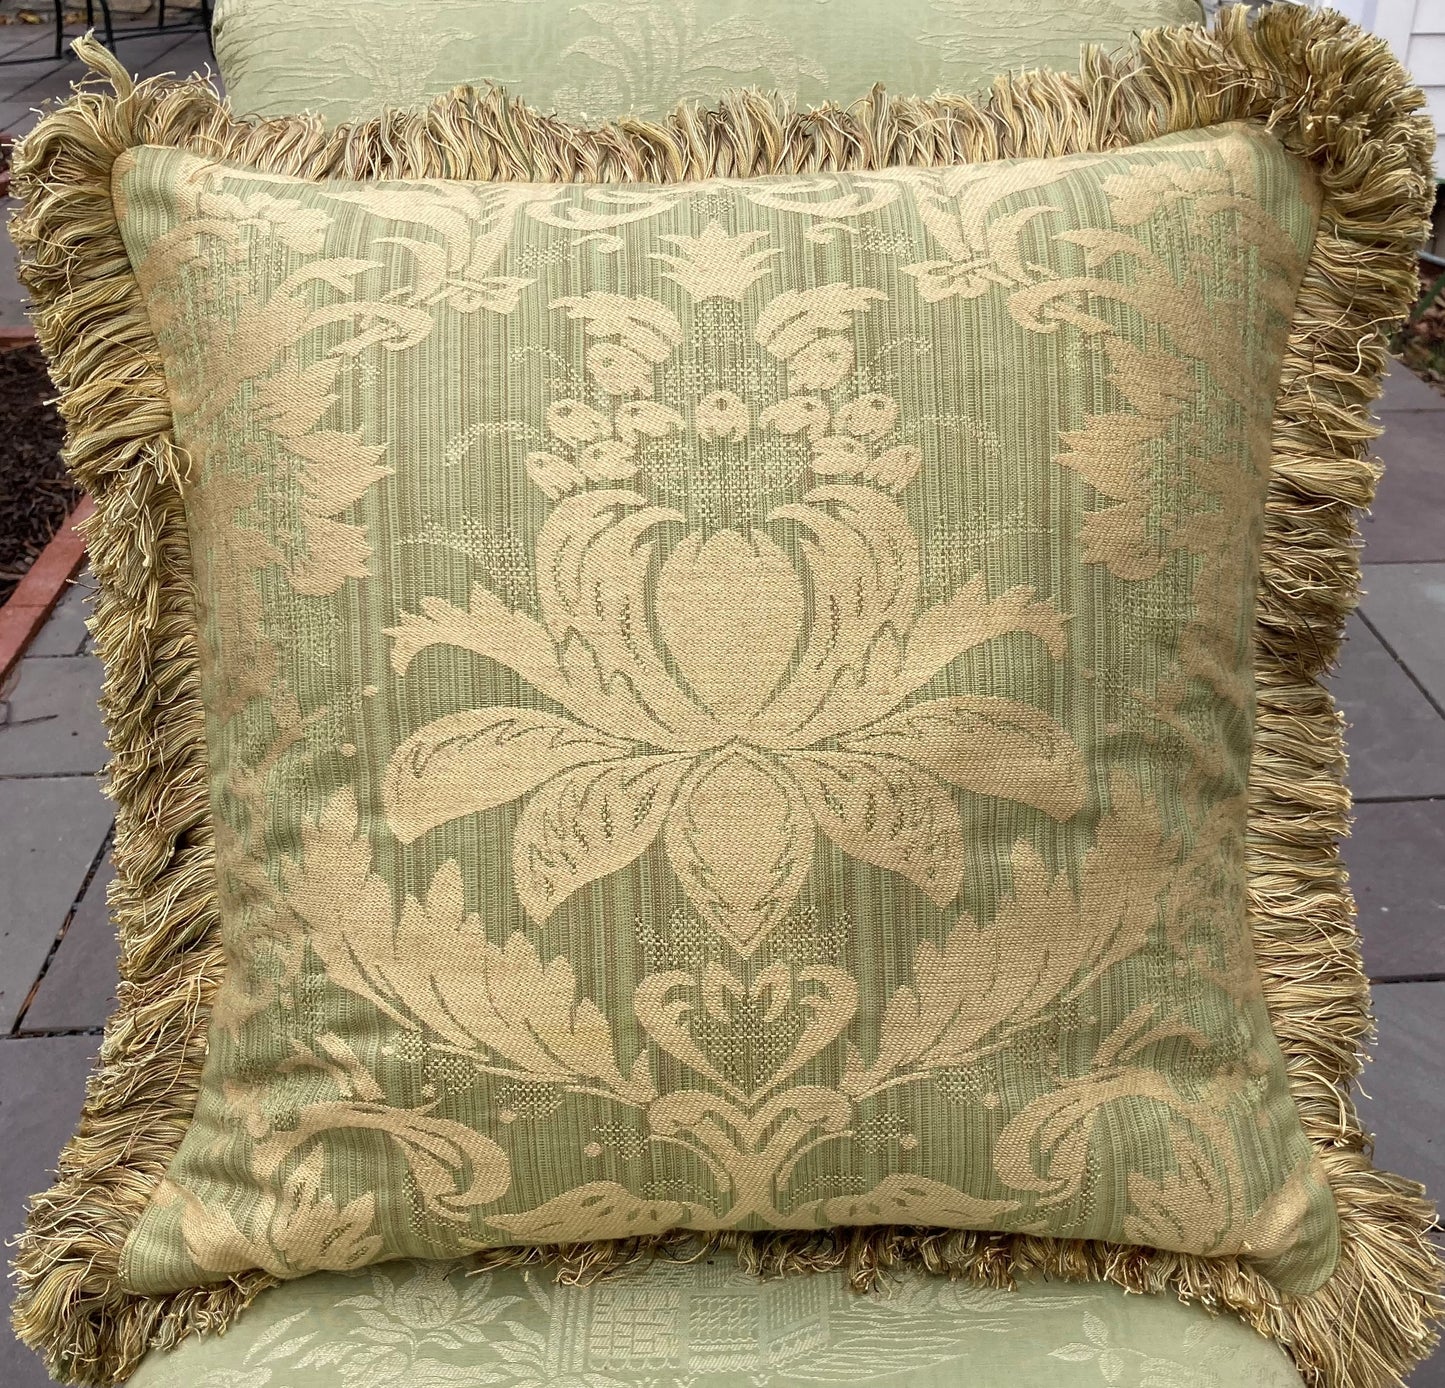 Brunschwig Green Strie Damask 20 X 20 Square Designer Pillow Front with Down Feather Insert